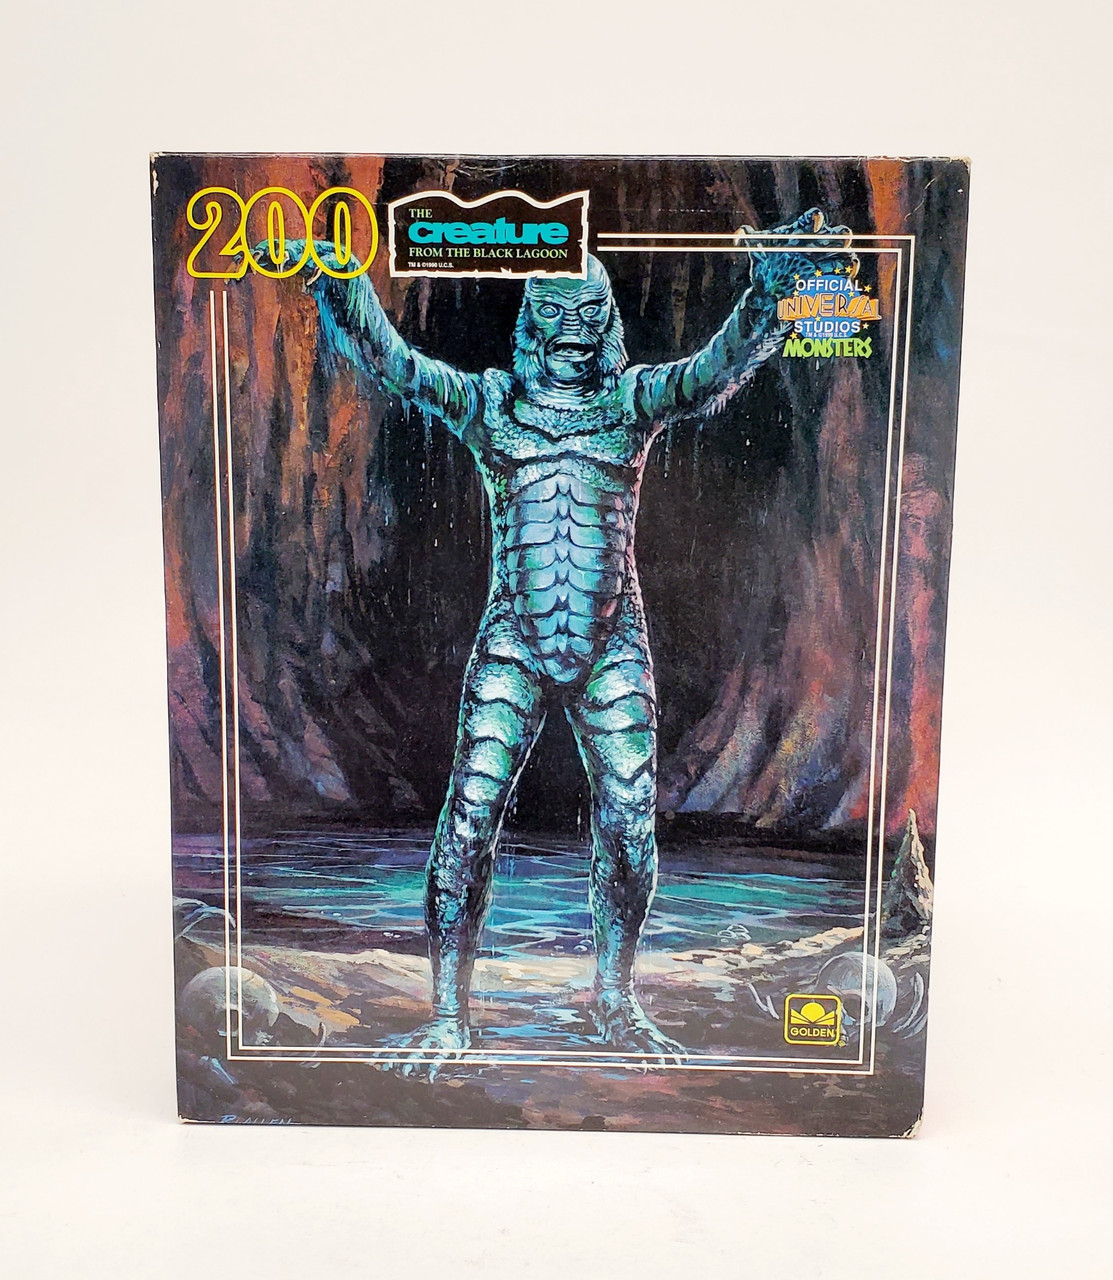 Golden Universal Monsters Creature from the Black Lagoon Jigsaw Puzzle